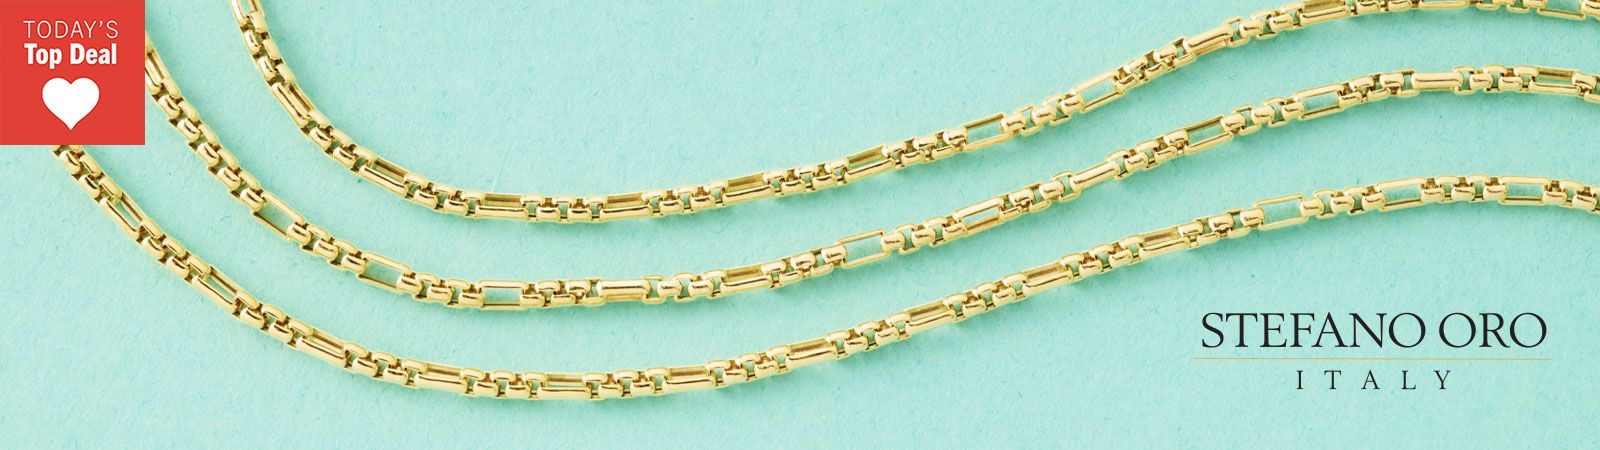 213-069 Brand New 14K Gold Figaro Rounded Box Link Necklace Available in 4 Lengths All Perfectly Crafted in 14K Italian Yellow Gold